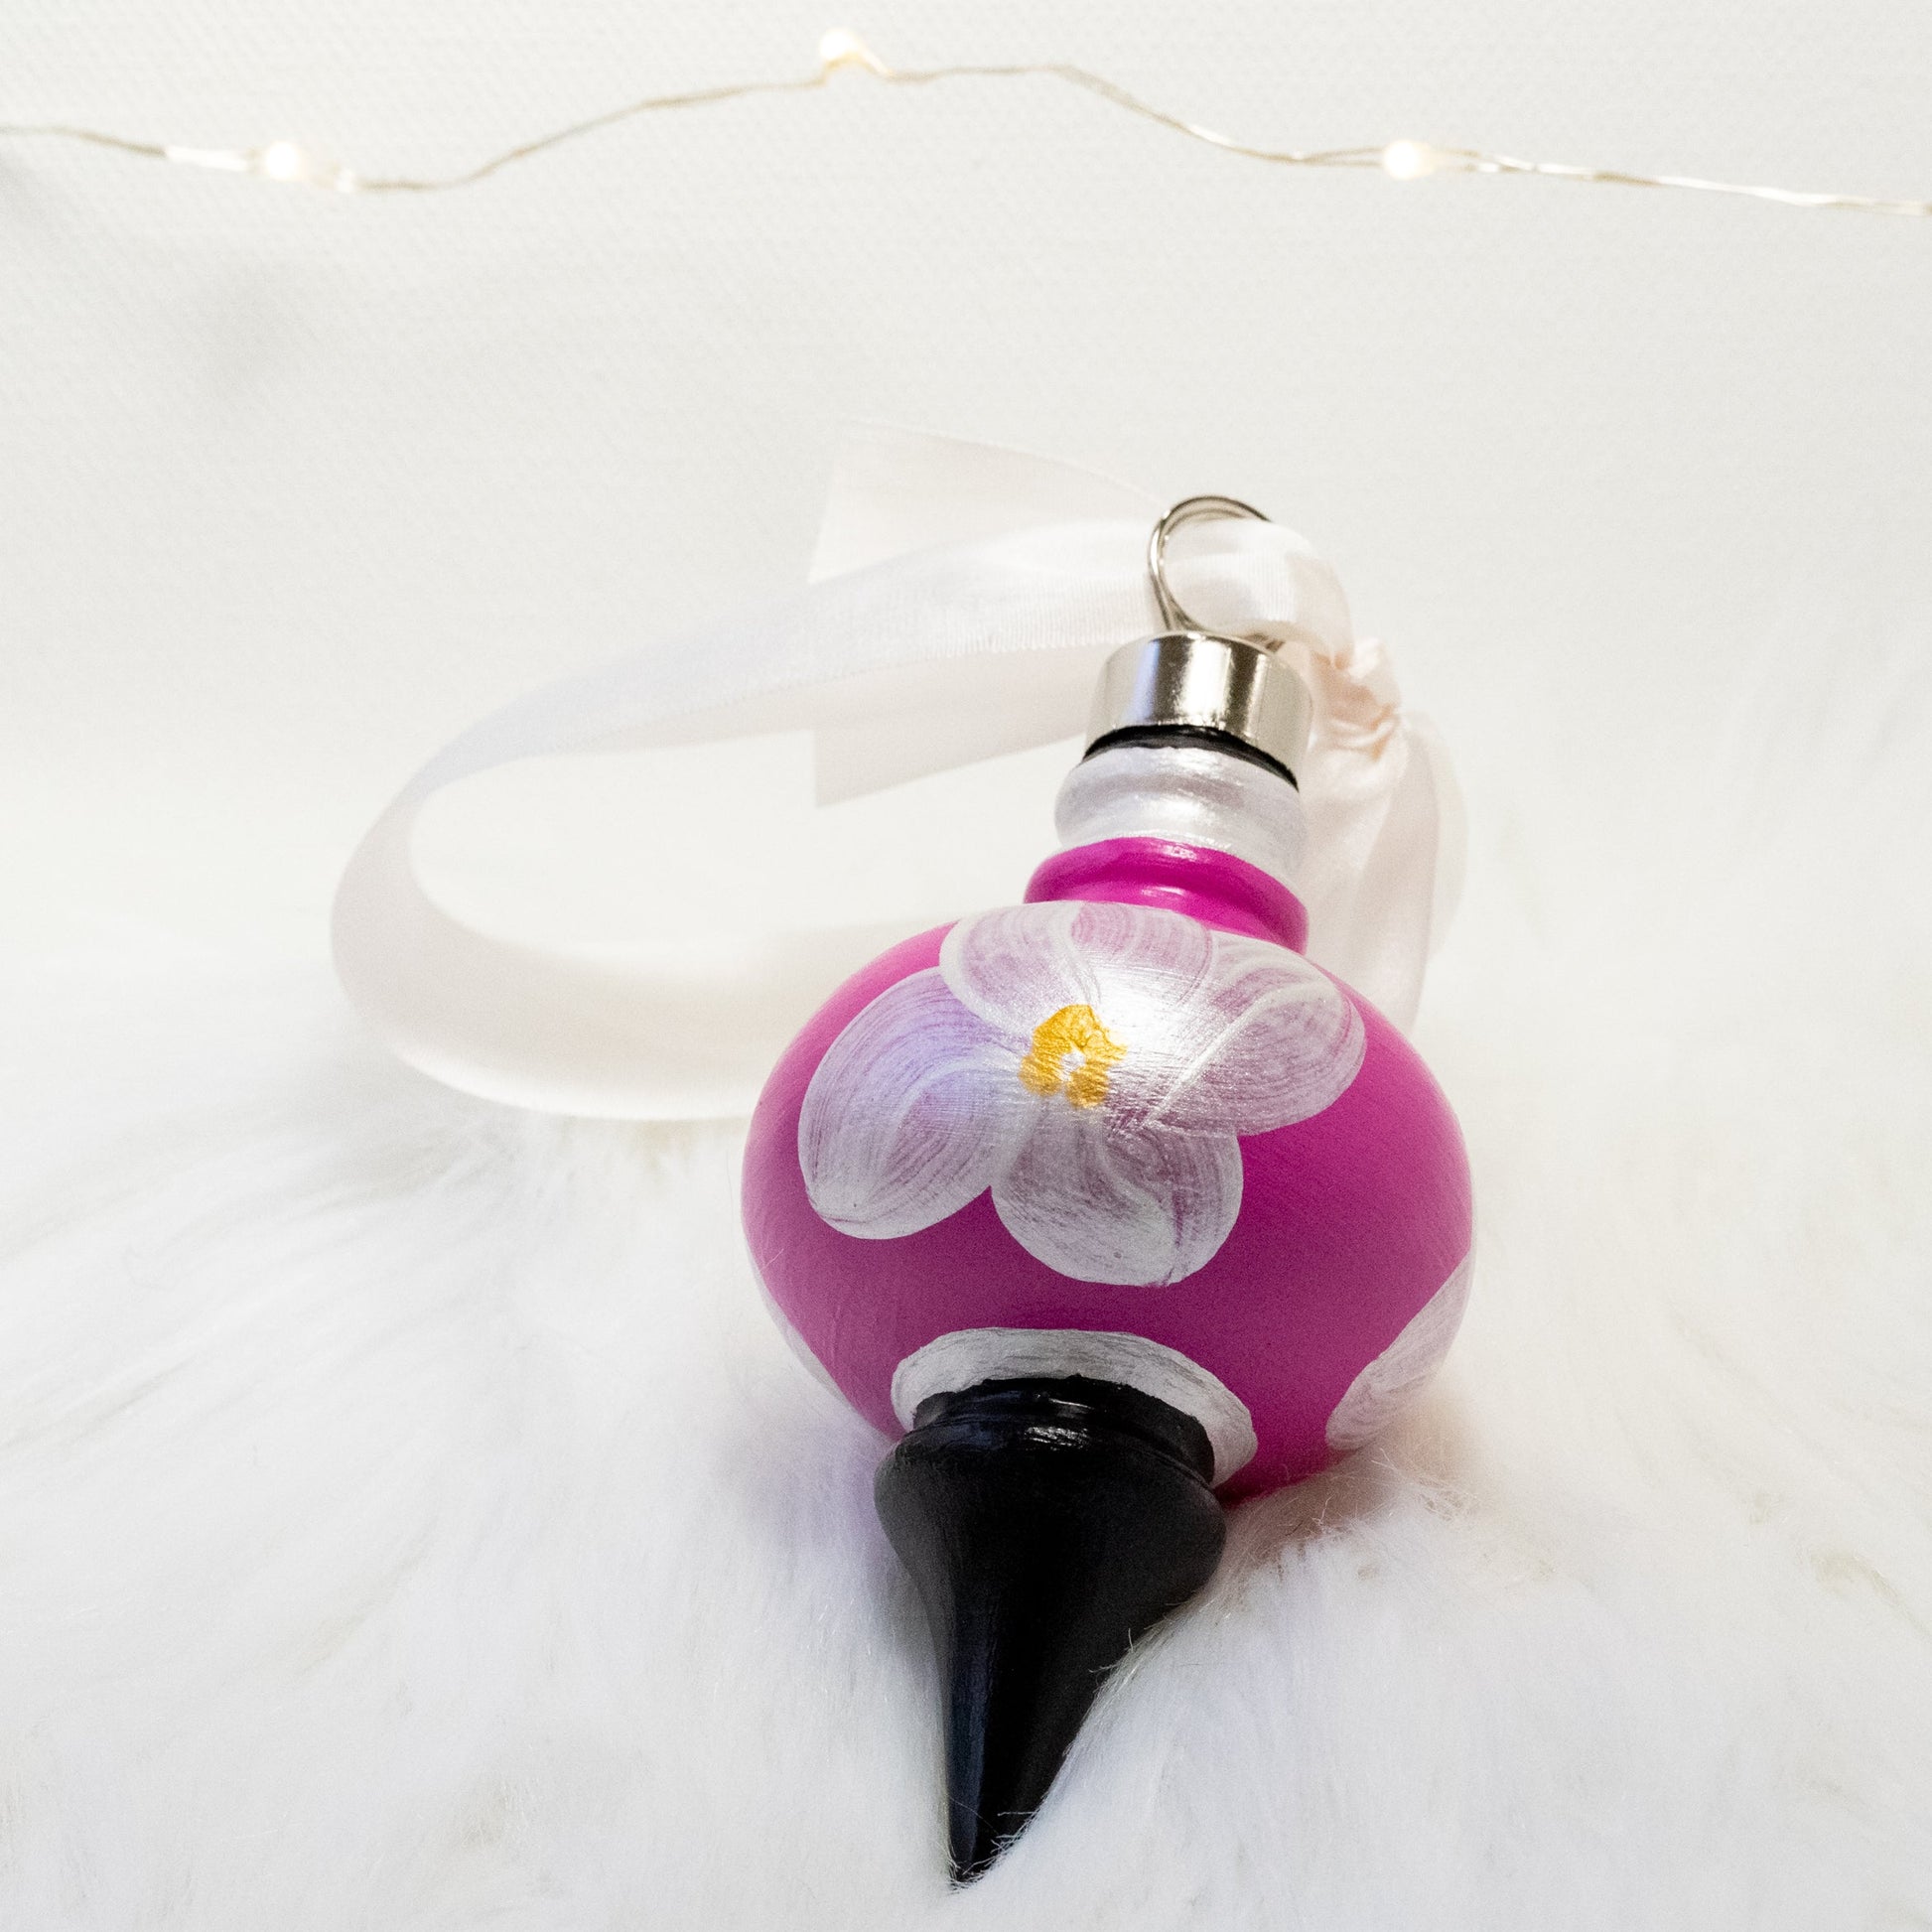 The Kiki Hand Painted Ornament features a fuchsia and black base coat, metallic white flowers with metallic white, gold and black accents. Painted using fluid acrylic and acryla gouache paints. Displayed on white faux fur with fairy lights in the background.